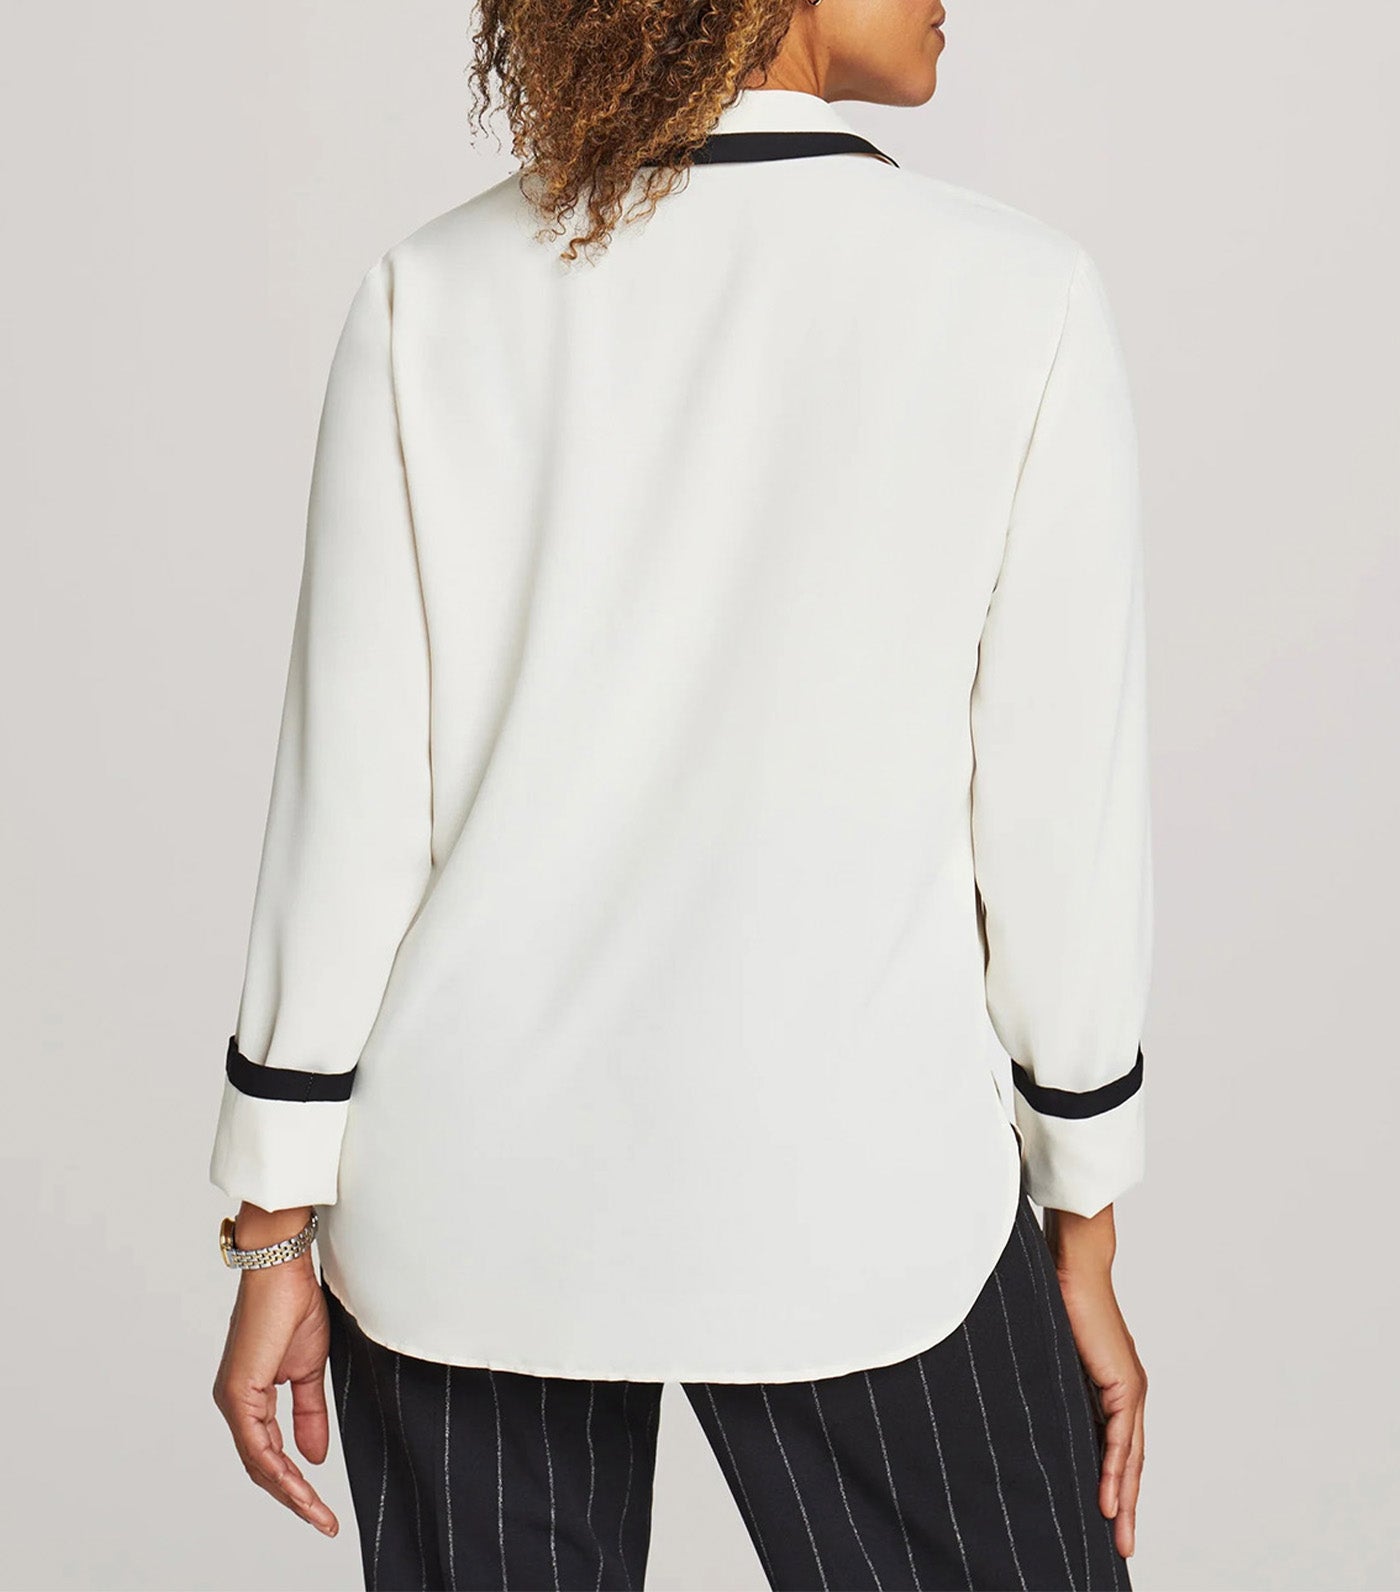 AK Button Down Blouse With Contrast Tipping Anne White